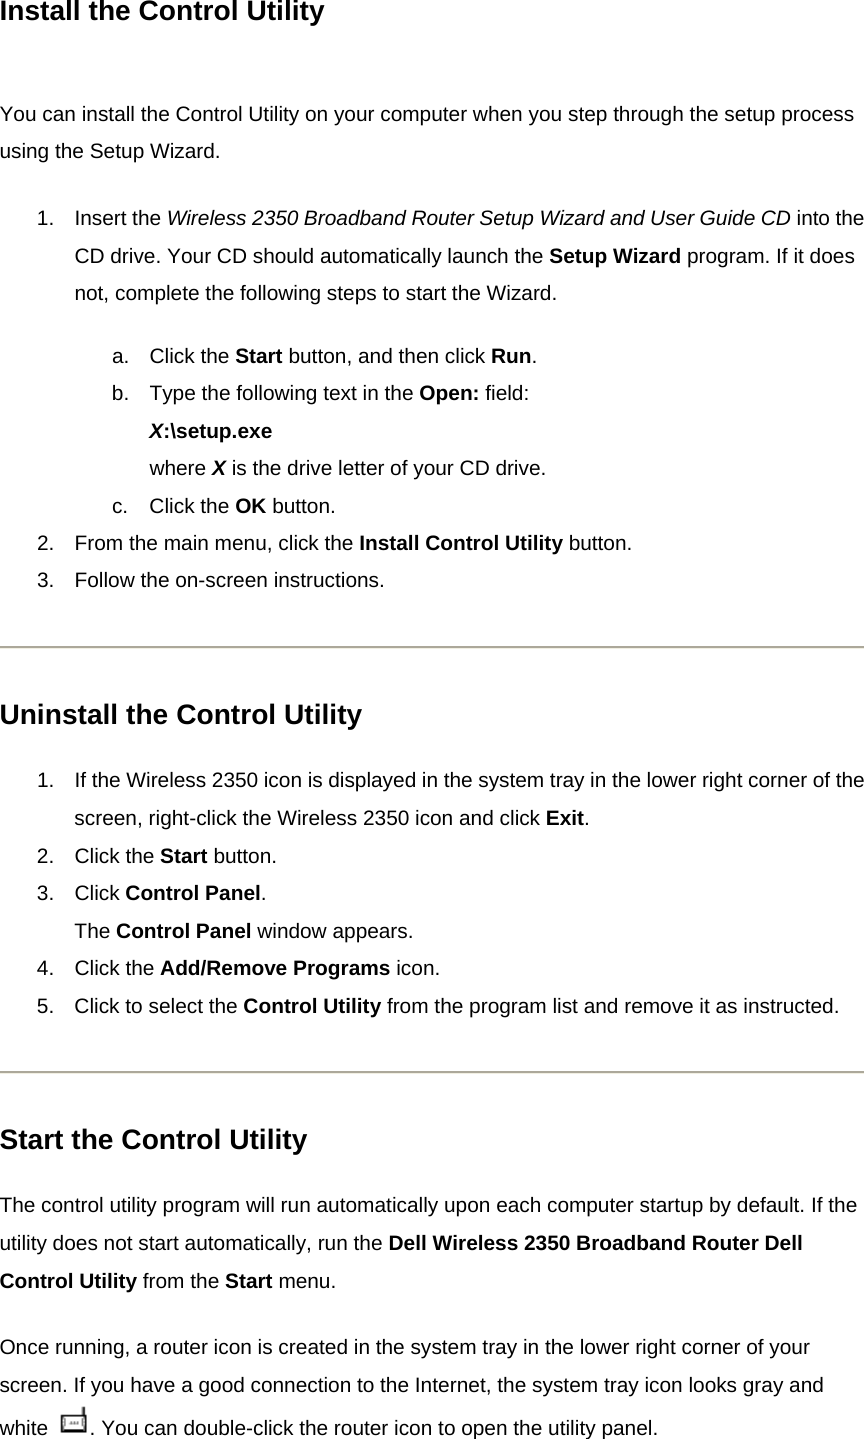 Install the Control Utility  You can install the Control Utility on your computer when you step through the setup process using the Setup Wizard. 1. Insert the Wireless 2350 Broadband Router Setup Wizard and User Guide CD into the CD drive. Your CD should automatically launch the Setup Wizard program. If it does not, complete the following steps to start the Wizard. a. Click the Start button, and then click Run. b.  Type the following text in the Open: field: X:\setup.exe where X is the drive letter of your CD drive. c. Click the OK button.   2.  From the main menu, click the Install Control Utility button.   3.  Follow the on-screen instructions.    Uninstall the Control Utility 1.  If the Wireless 2350 icon is displayed in the system tray in the lower right corner of the screen, right-click the Wireless 2350 icon and click Exit. 2. Click the Start button. 3. Click Control Panel. The Control Panel window appears. 4. Click the Add/Remove Programs icon.   5.  Click to select the Control Utility from the program list and remove it as instructed.    Start the Control Utility The control utility program will run automatically upon each computer startup by default. If the utility does not start automatically, run the Dell Wireless 2350 Broadband Router Dell Control Utility from the Start menu. Once running, a router icon is created in the system tray in the lower right corner of your screen. If you have a good connection to the Internet, the system tray icon looks gray and white  . You can double-click the router icon to open the utility panel. 